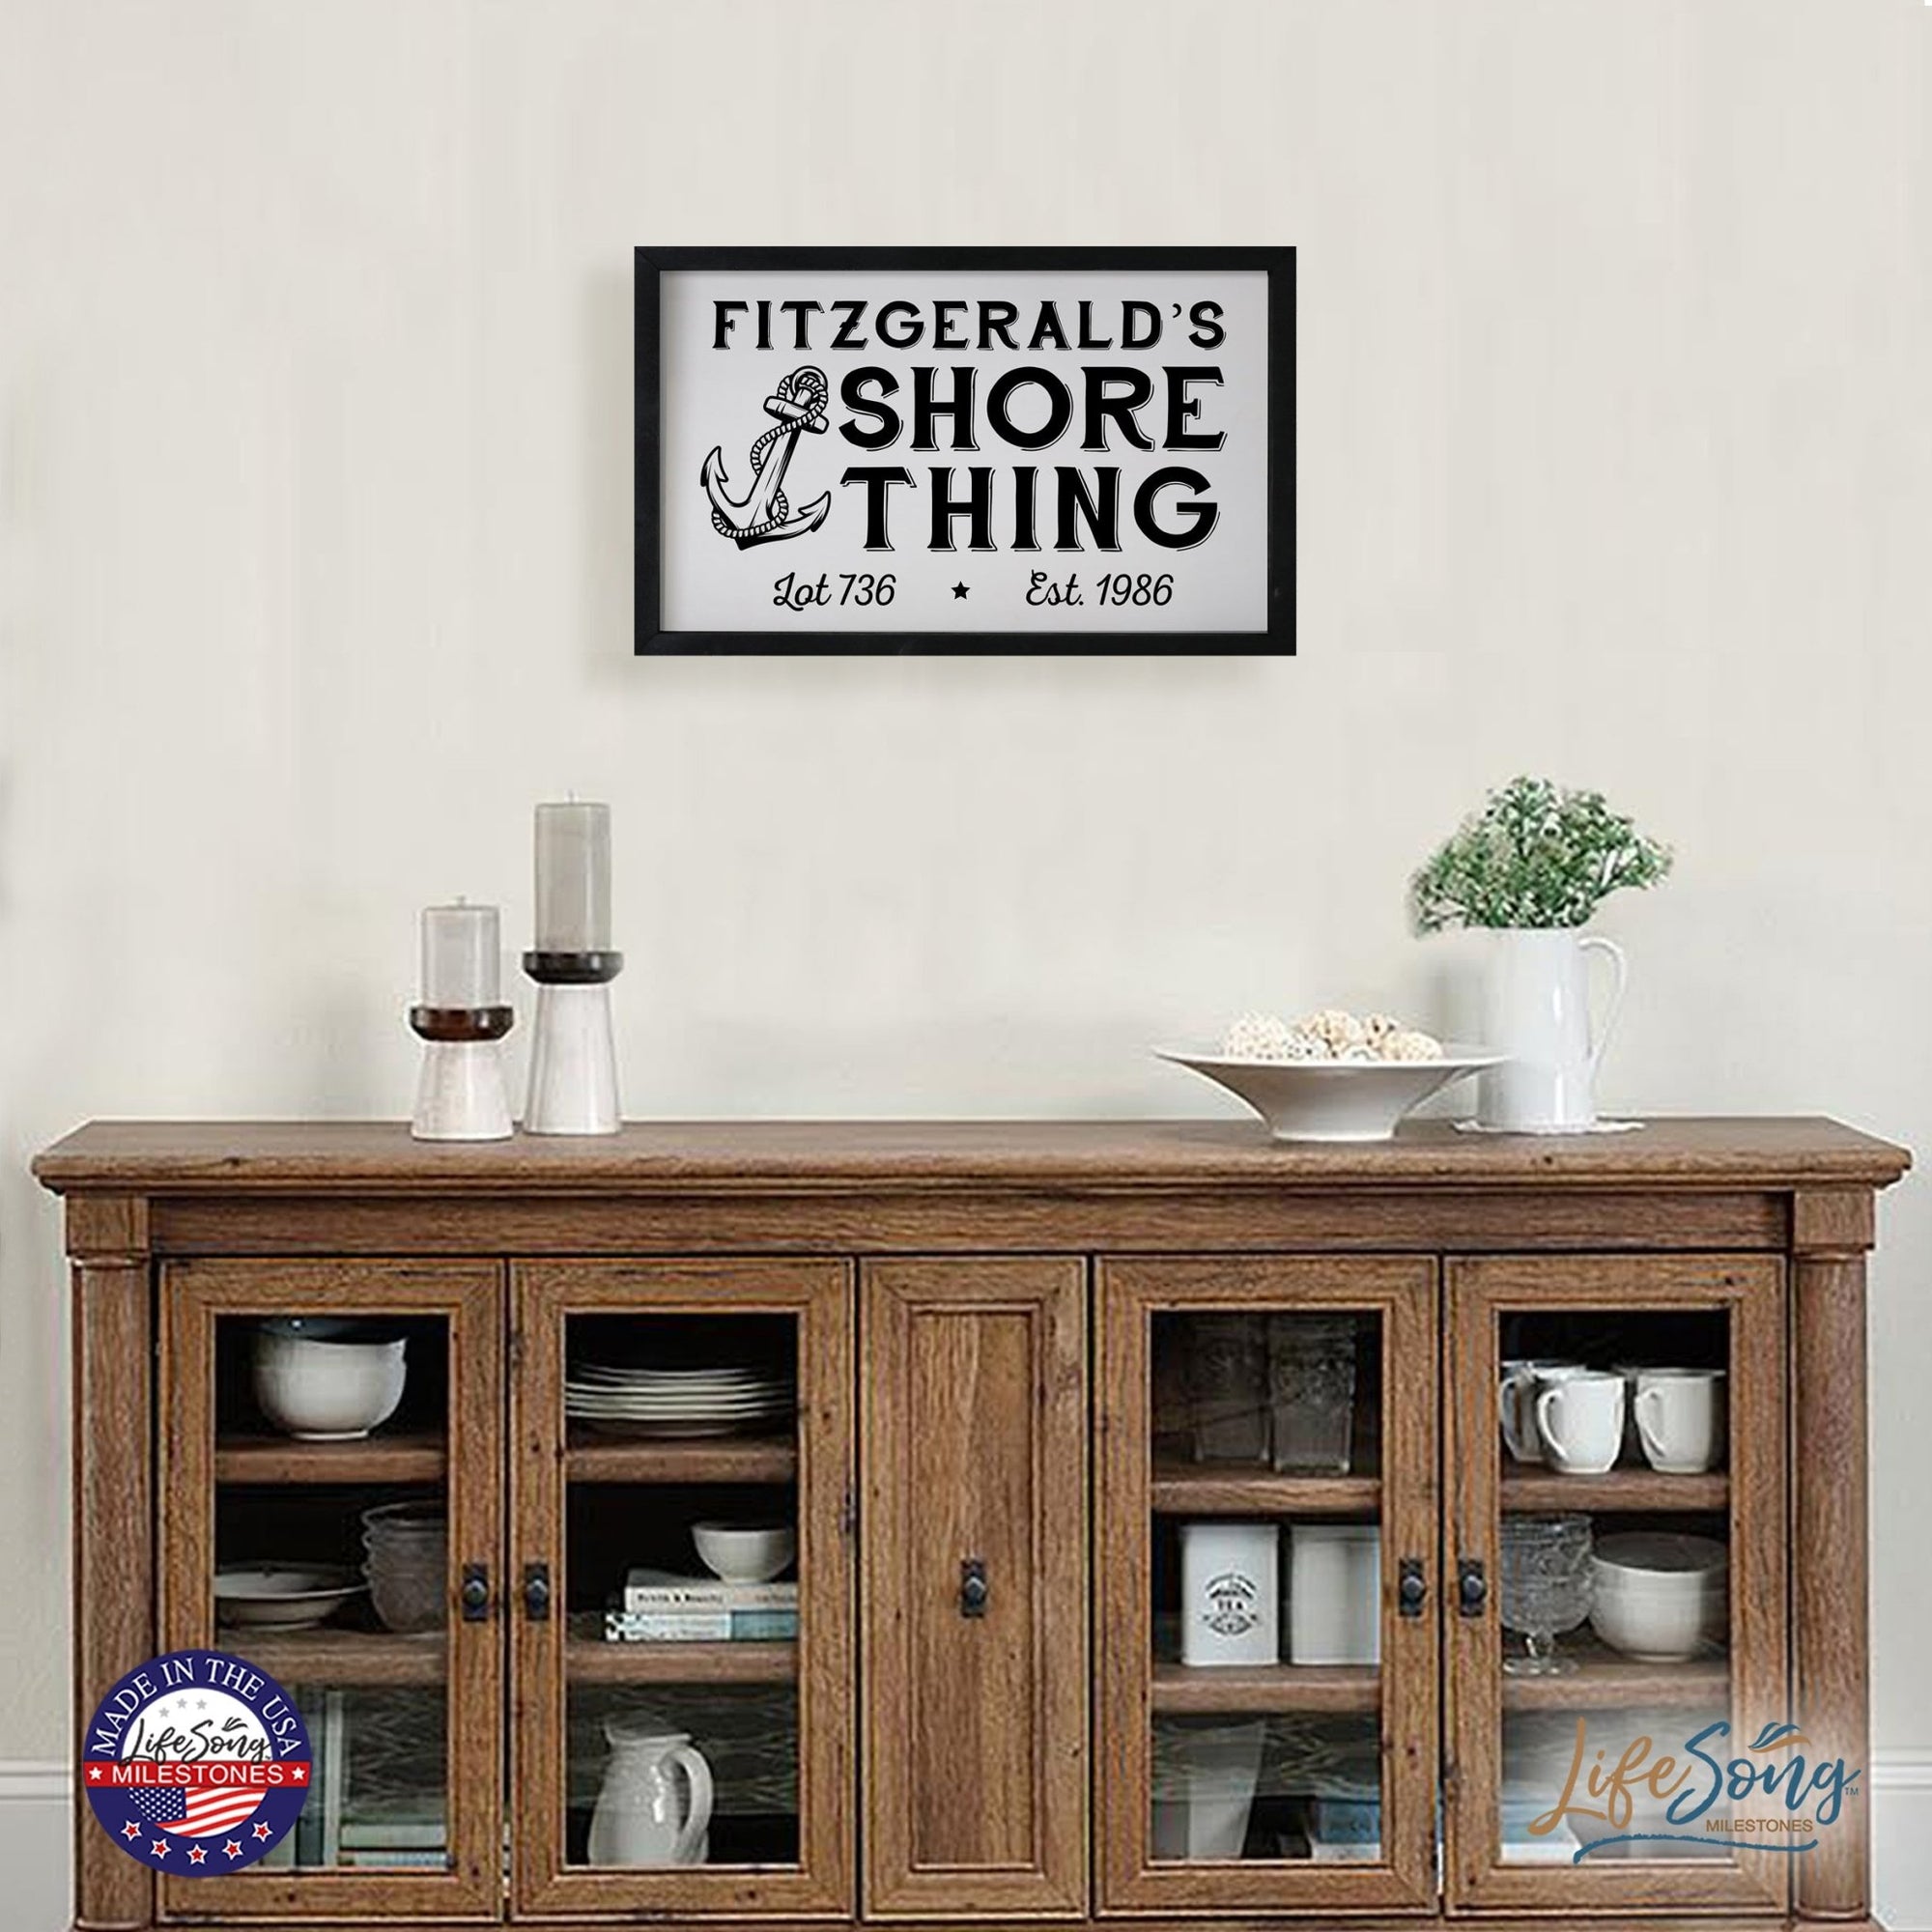 Inspirational Personalized Framed Shadow Box 16x25 - Shore Thing - LifeSong Milestones